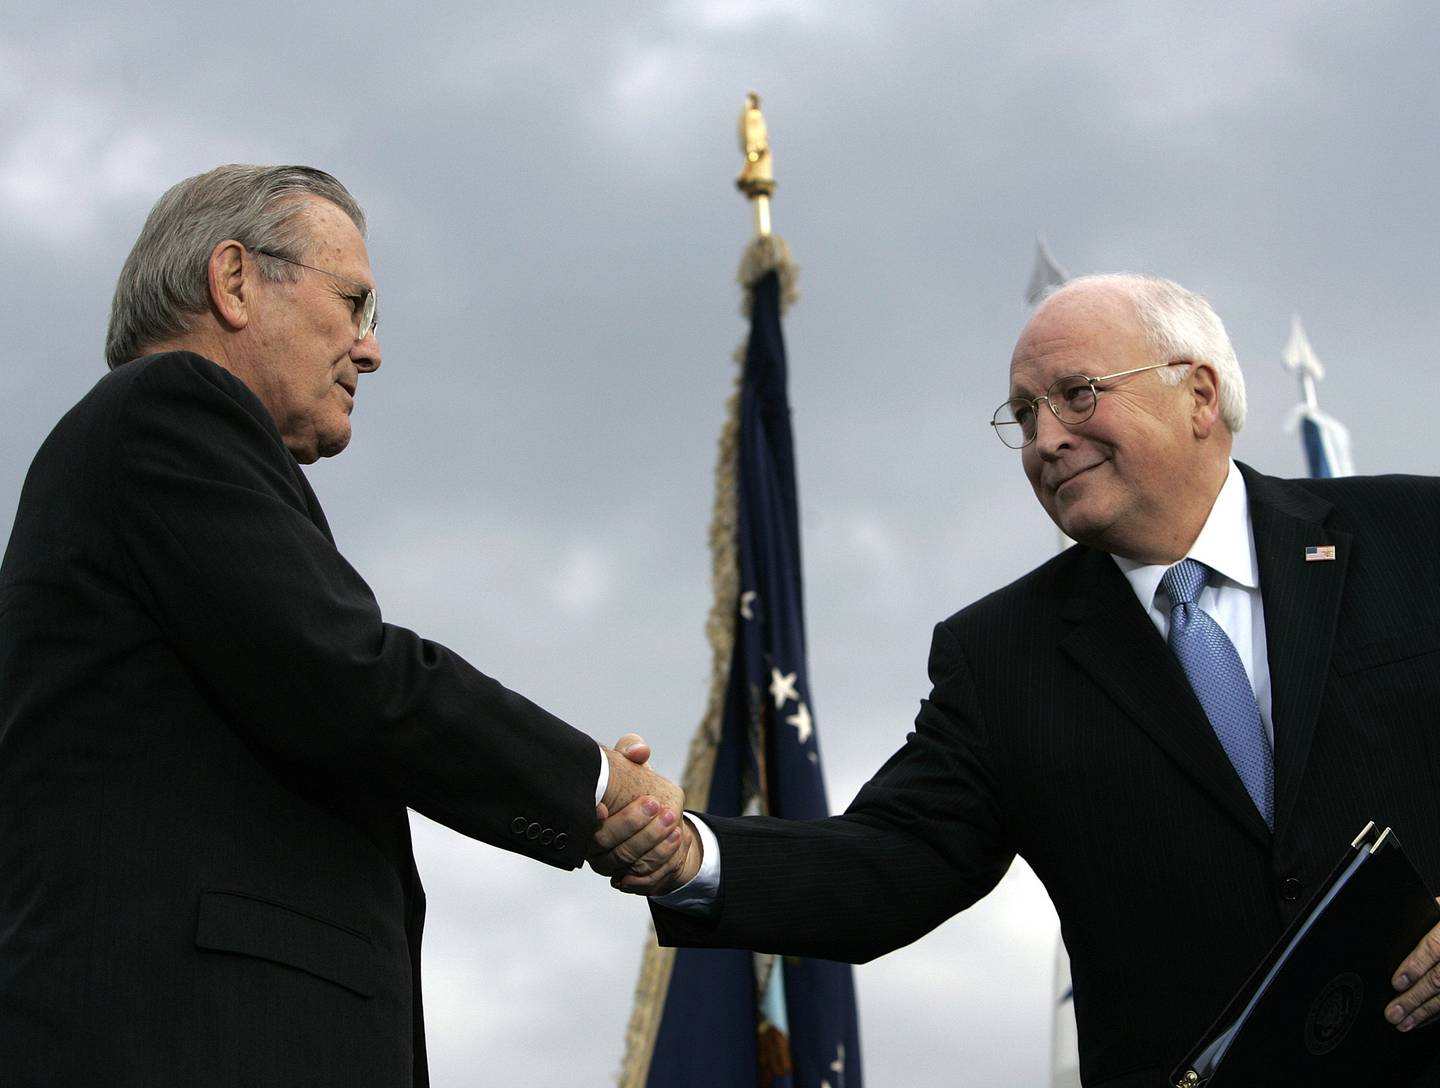 In this Dec. 15, 2006, file photo, outgoing Defense Secretary Donald H. Rumsfeld, left, shakes hands with Vice President Dick Cheney during an Armed Forces Full Honor Review for Rumsfeld at the Pentagon.